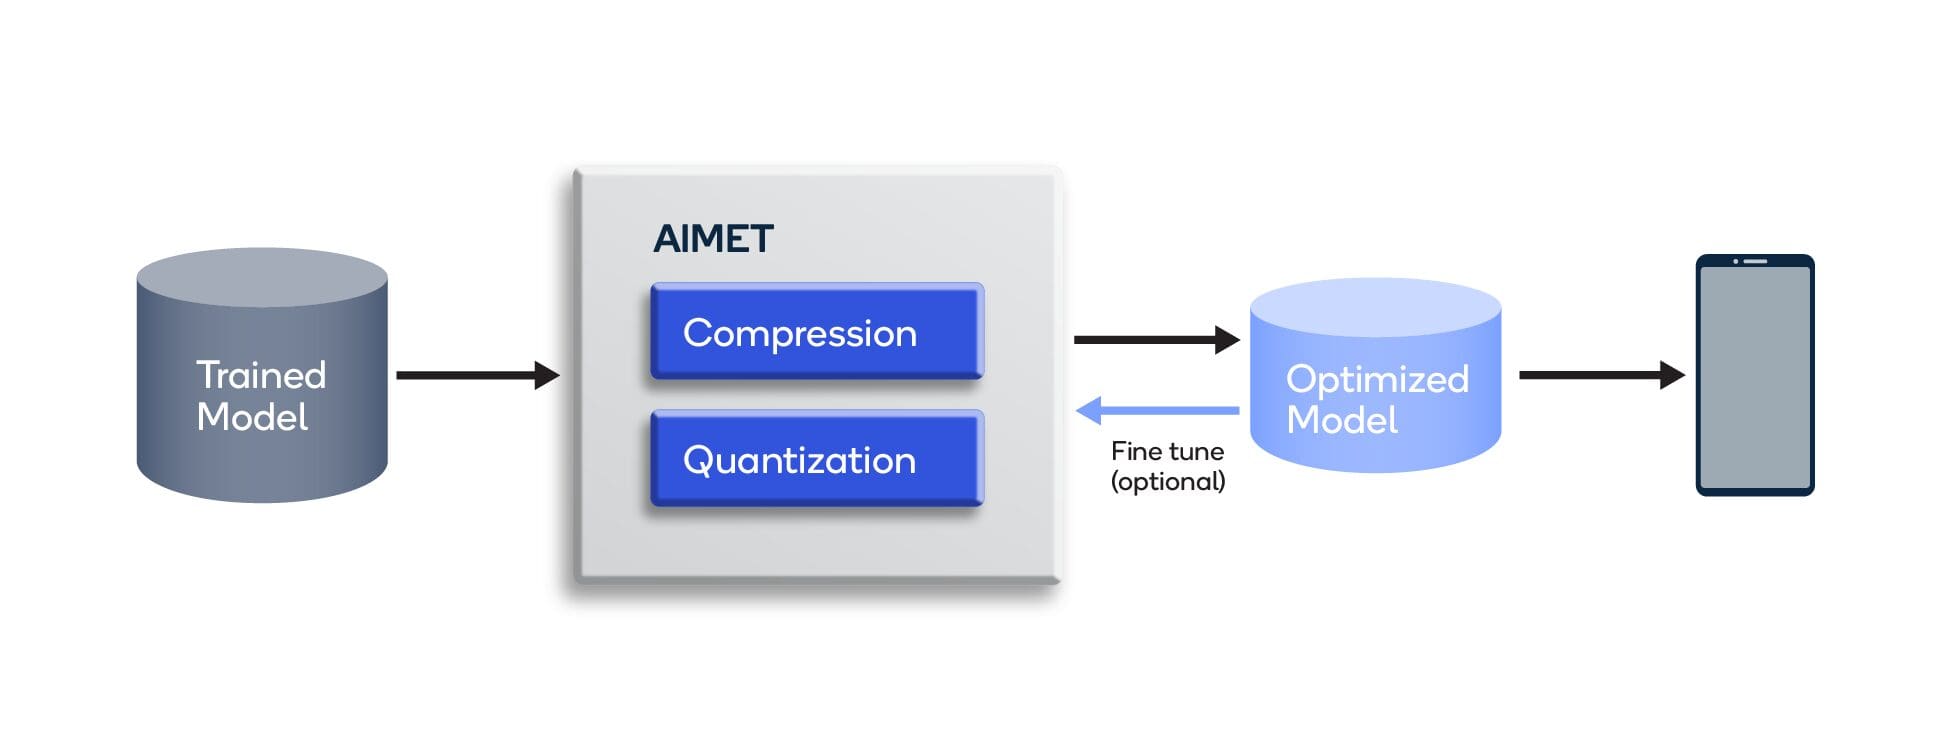 Neural Network Optimization with AIMET